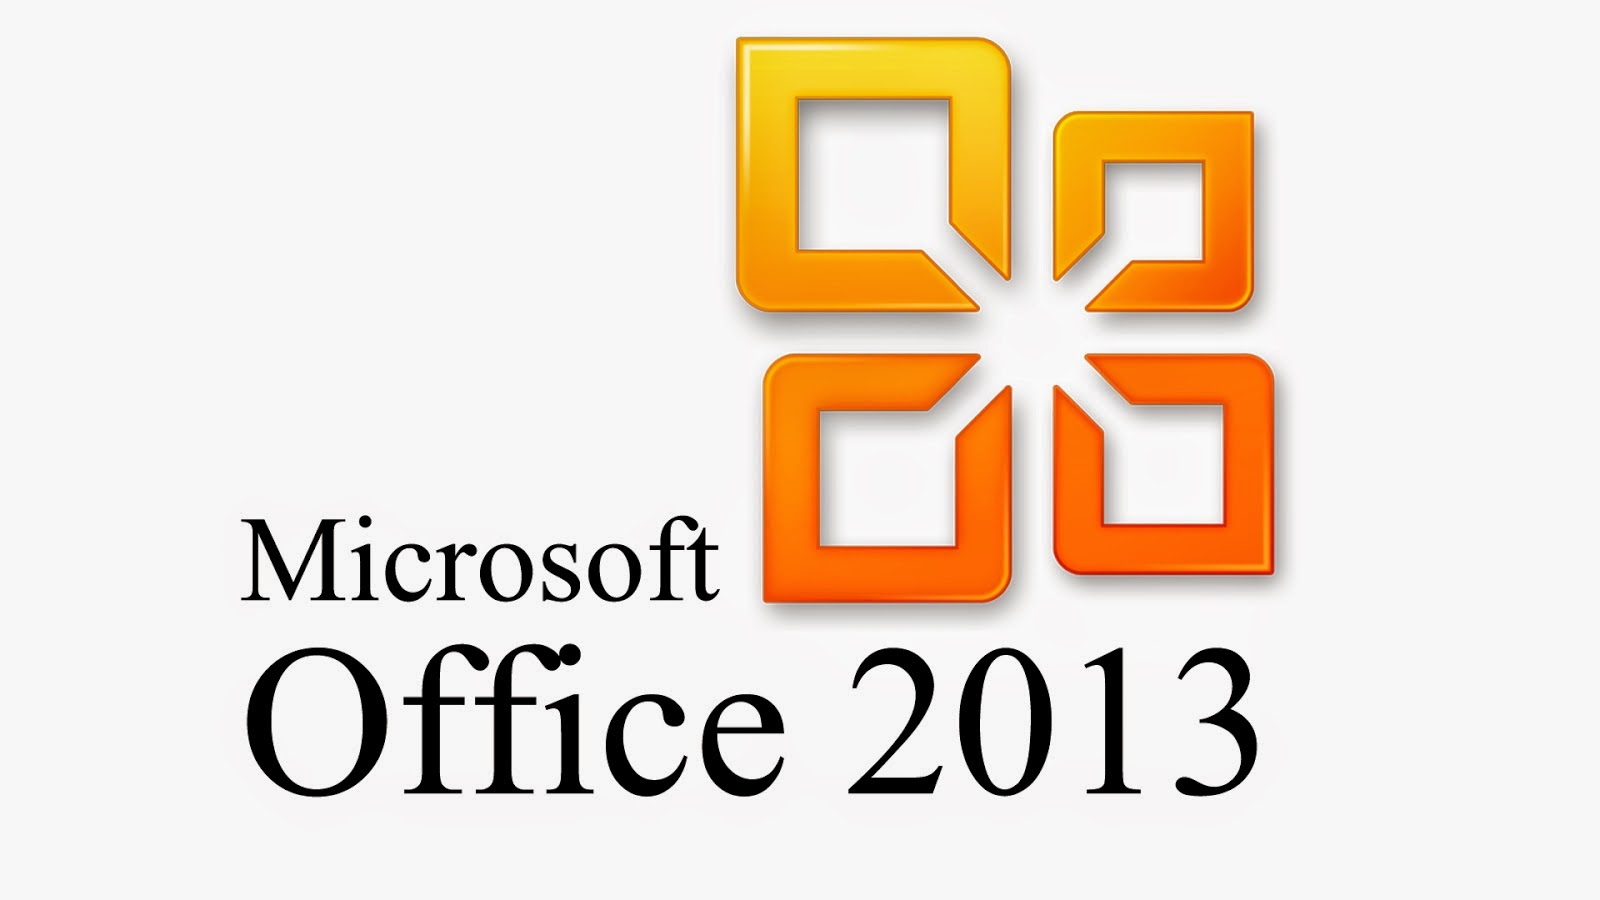 Download Microsoft office 2013 iso image free for 32/64 bit...